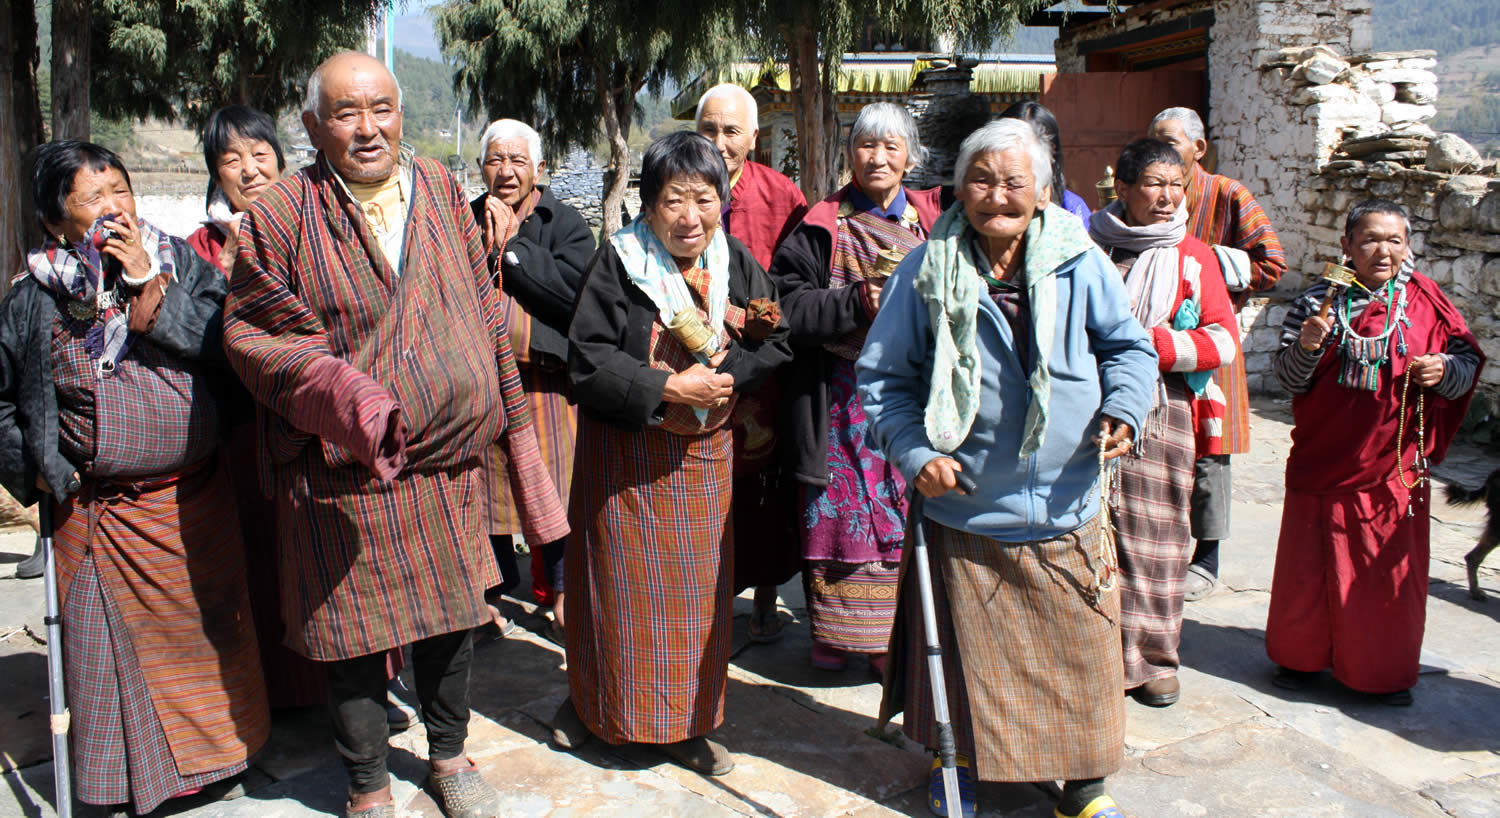 Townspeople arrive to request blessings from Jetsün Khandro Rinpoche.